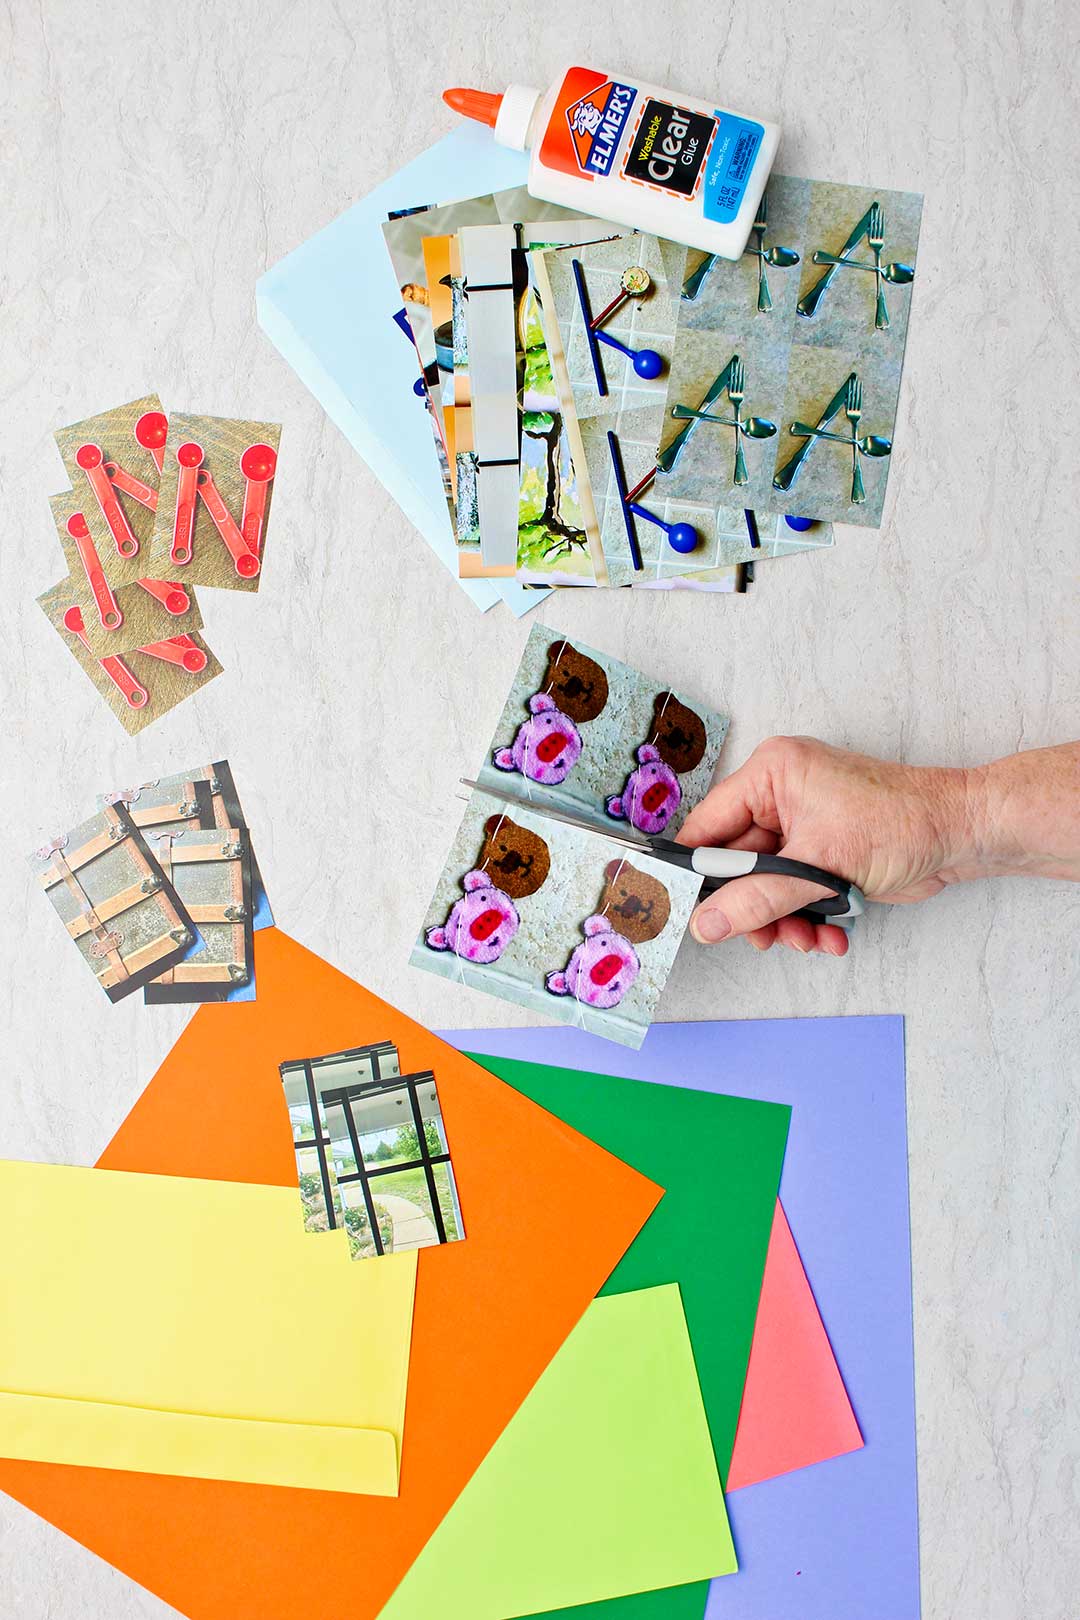 Hand cutting a print out of photo letters with other stacks of prints and colorful paper near by.